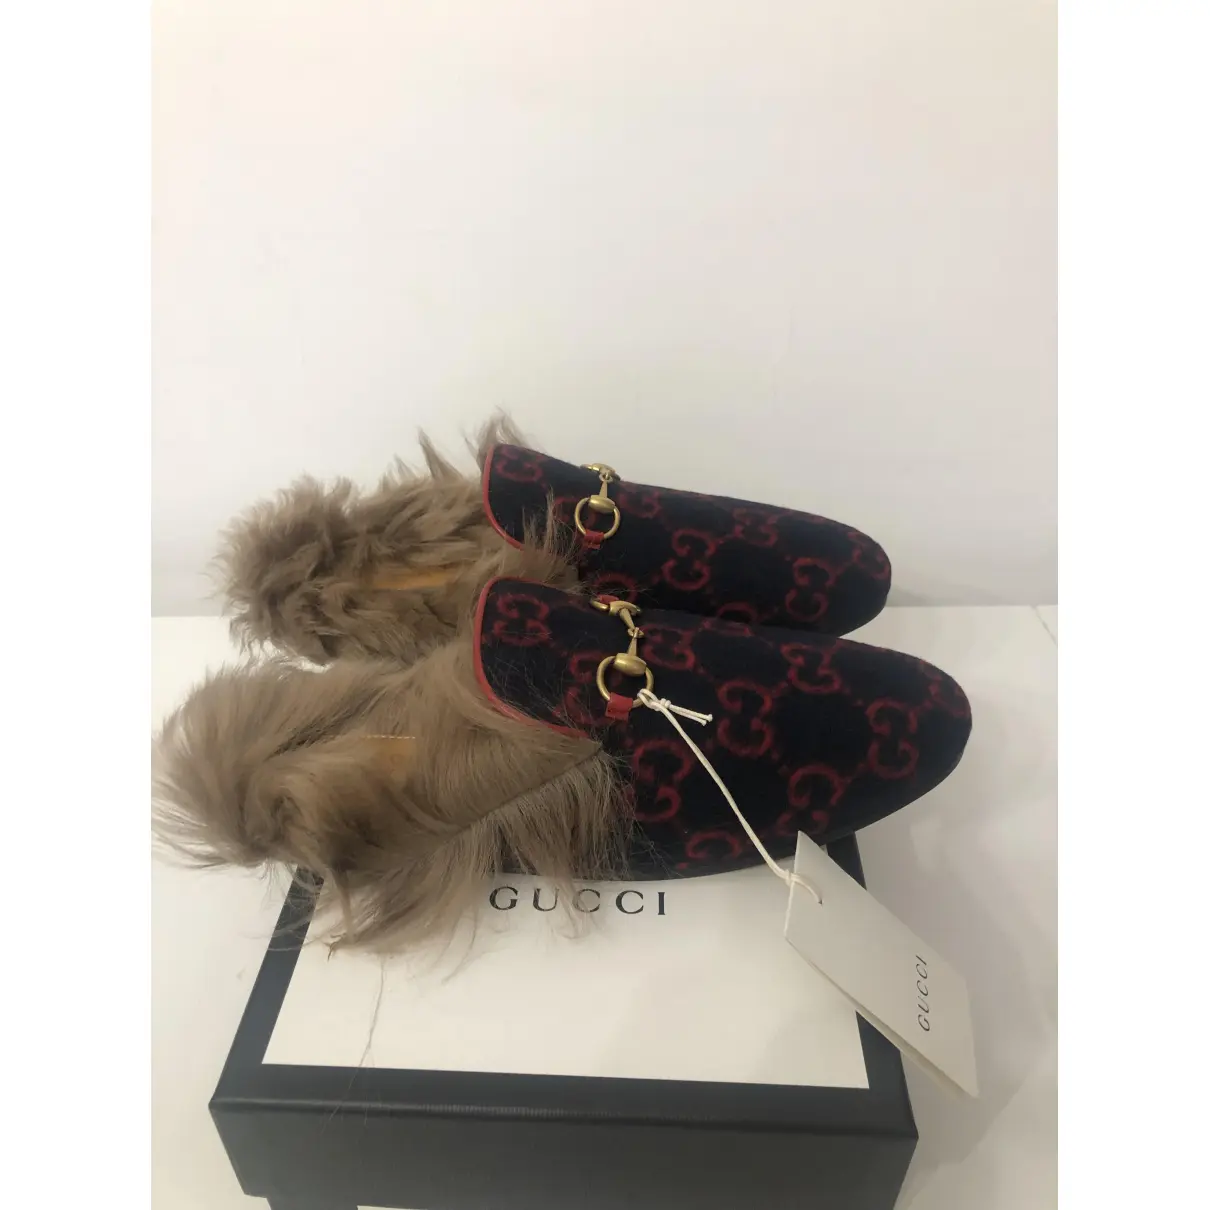 Buy Gucci Princetown flats online